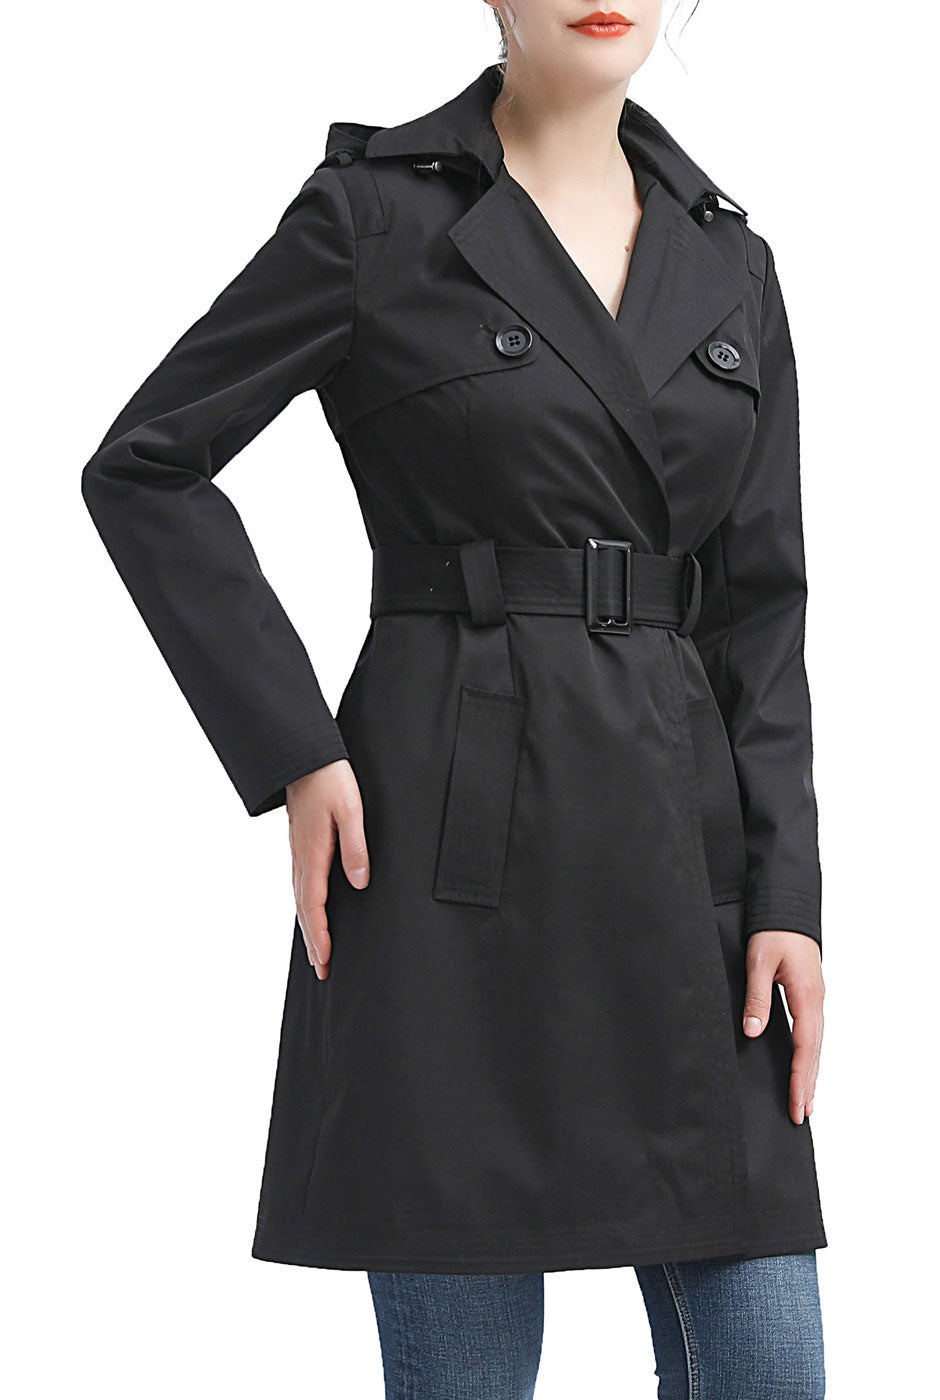 Gwi Tysan 2015 winter clothing new king zip code for women in many